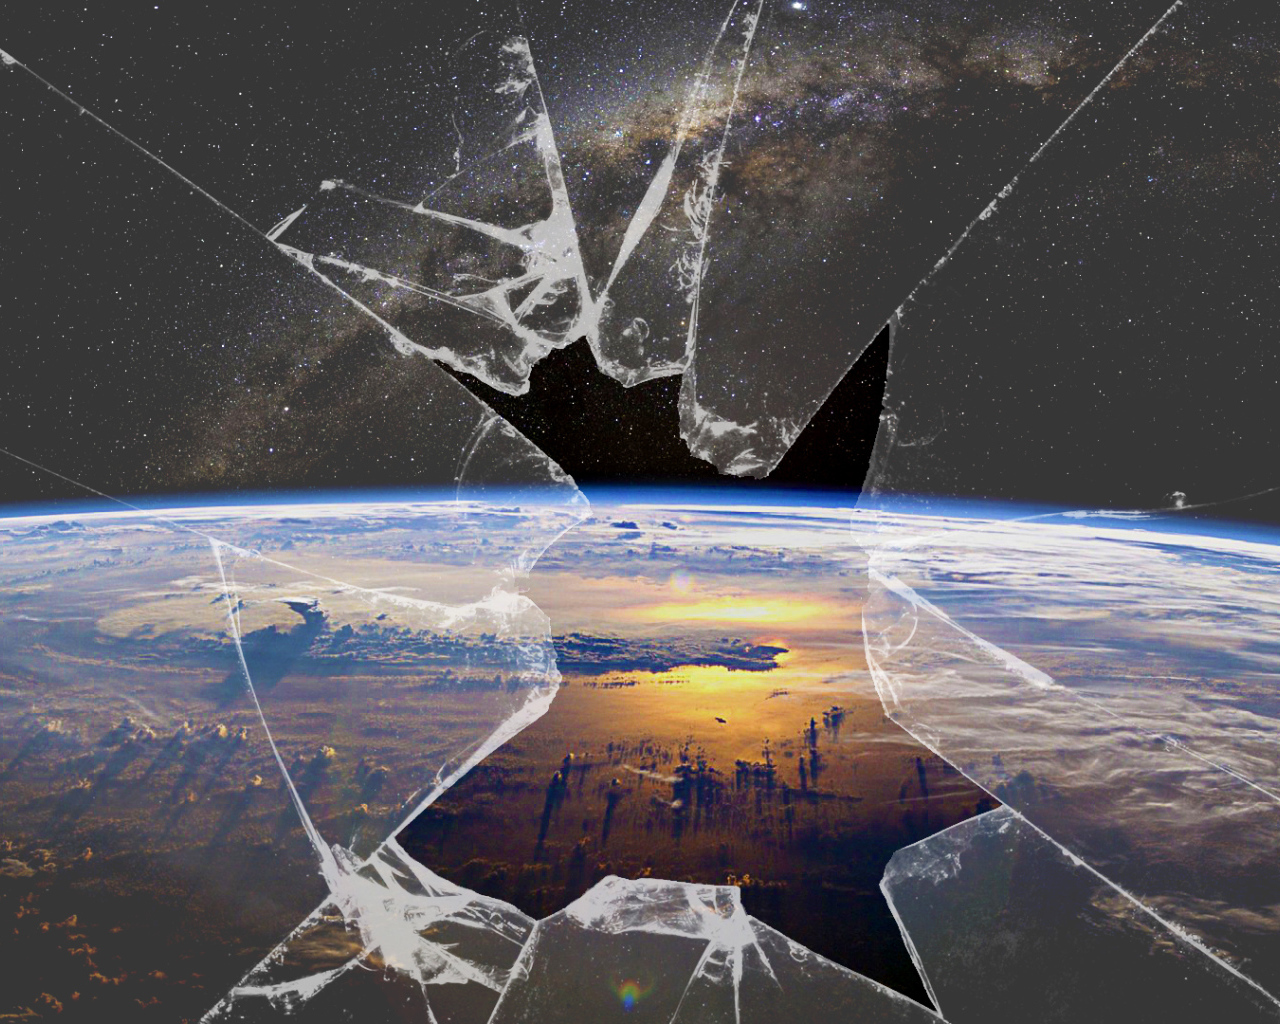 The view of the Earth through the broken glass